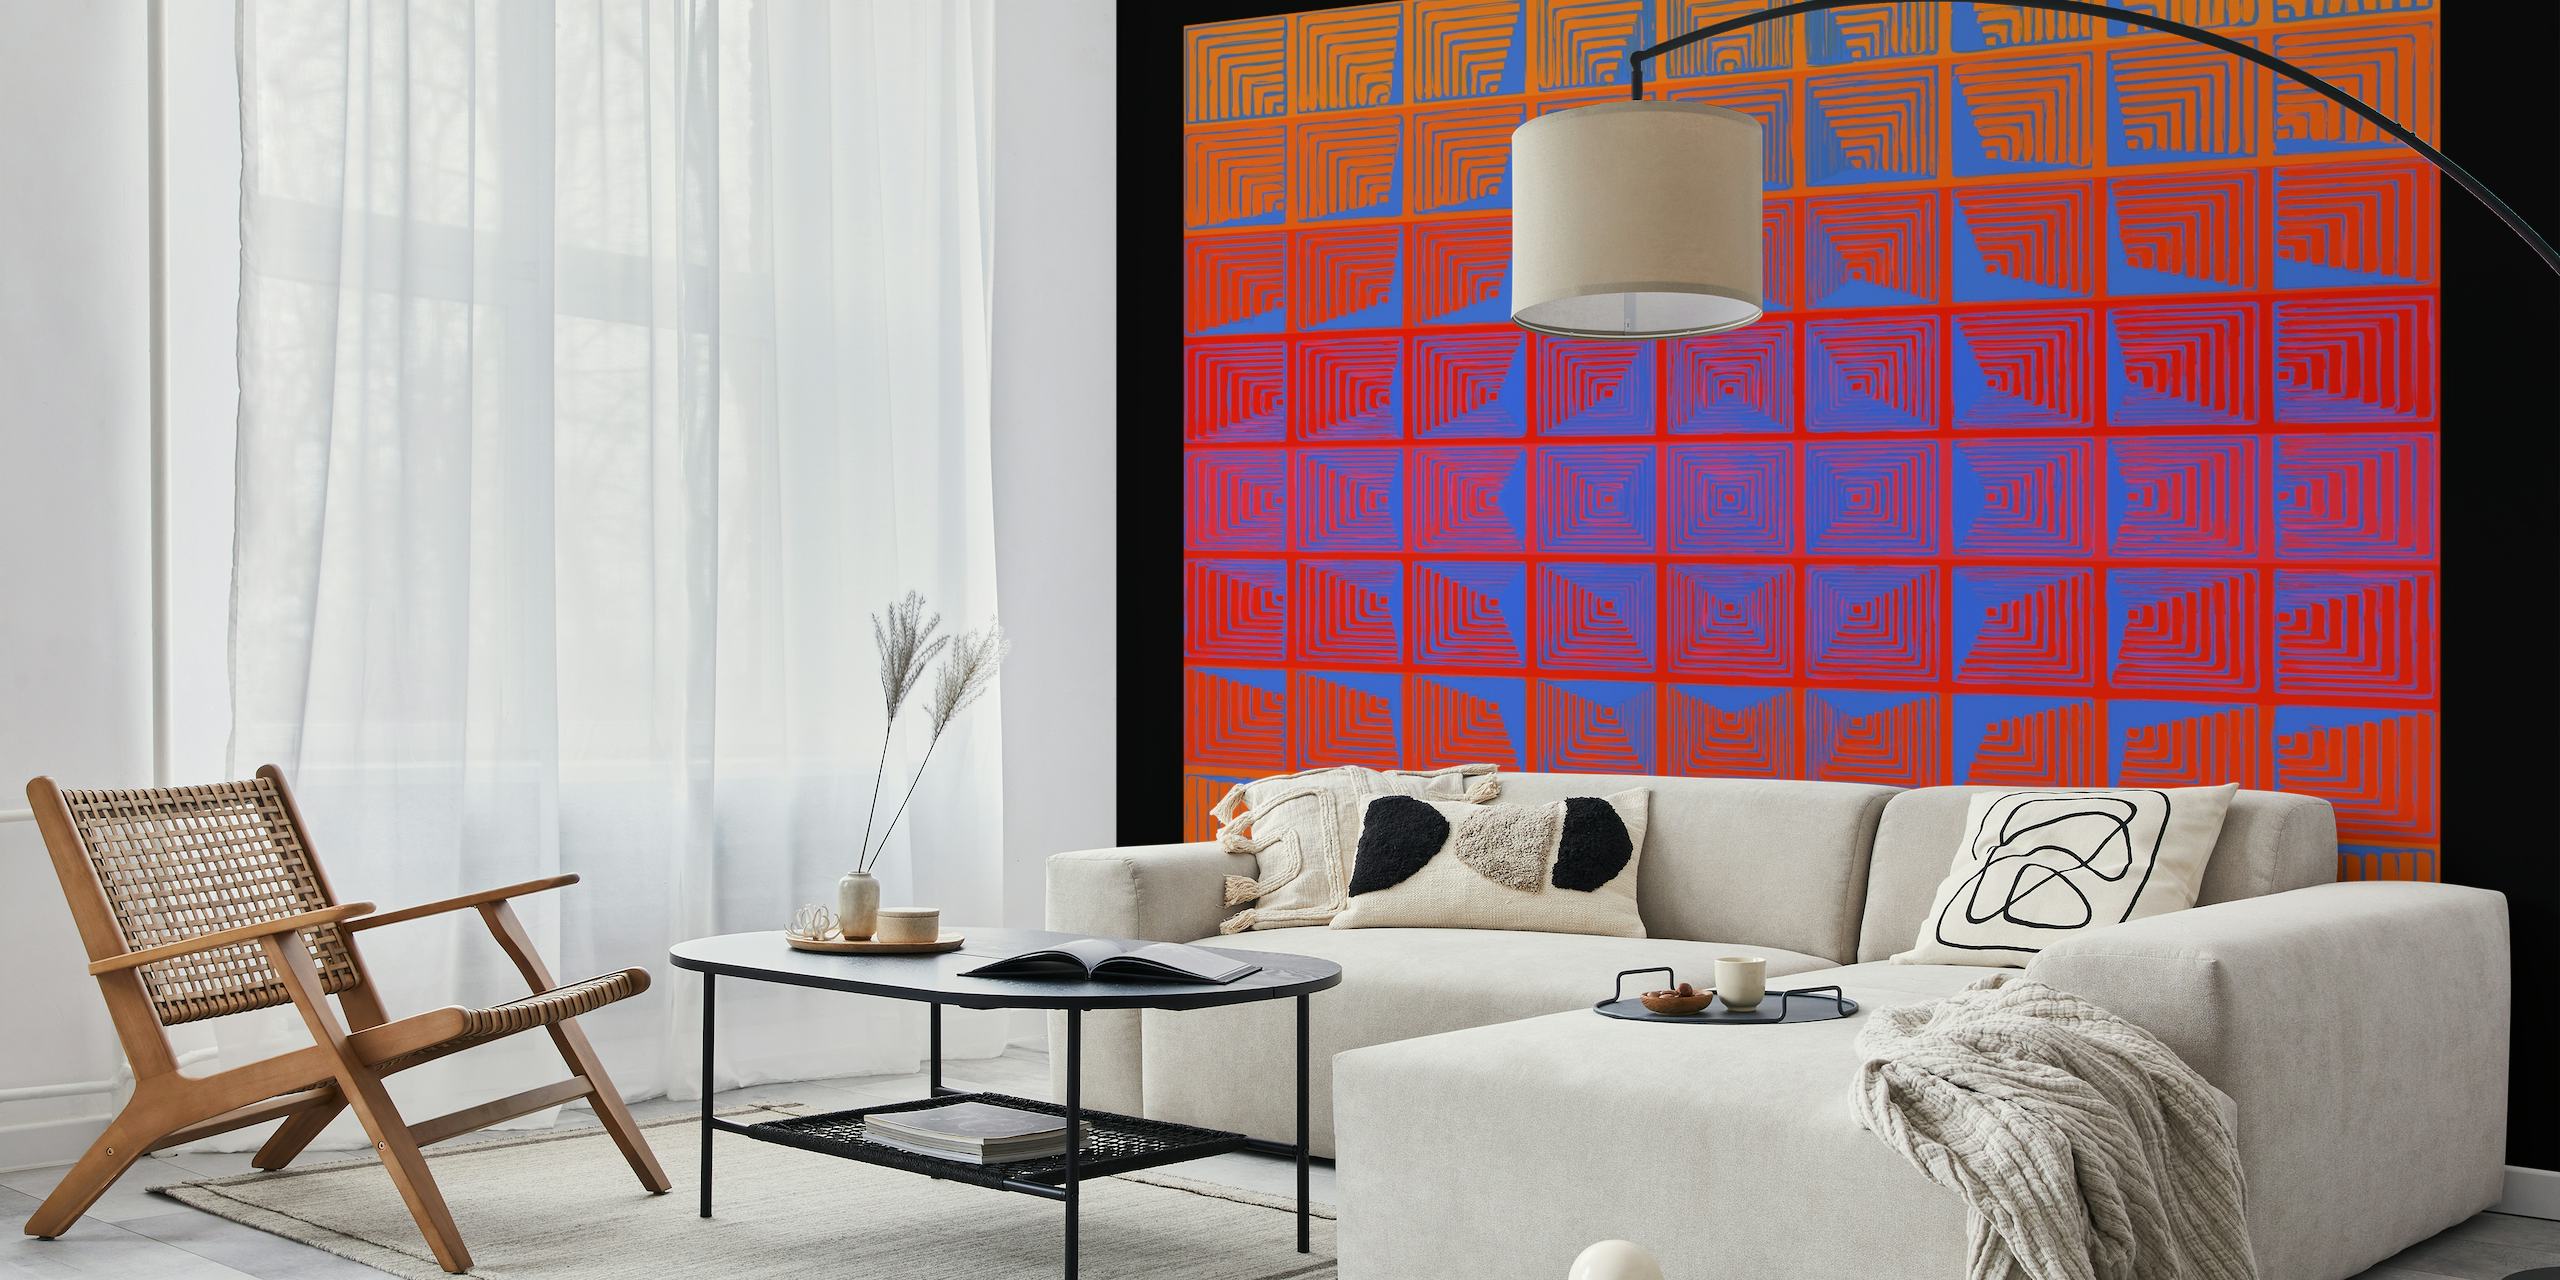 Retro-style Panton Inspired 70s Sunrise wall mural with geometric patterns in amber and cerulean tones